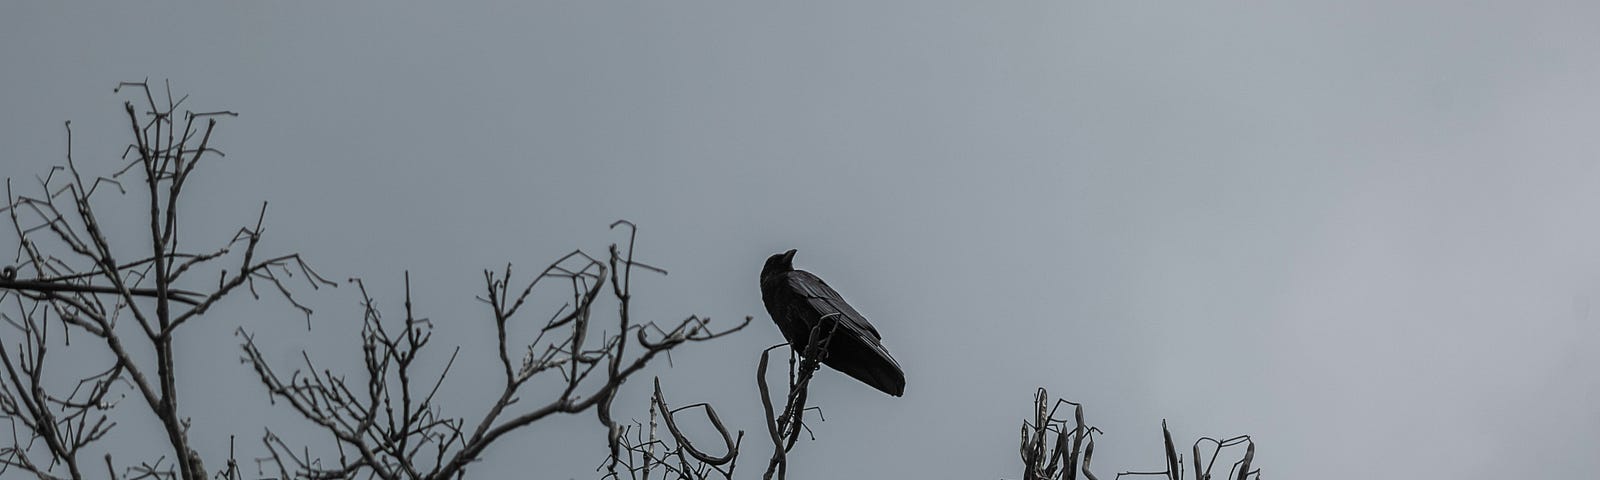 A raven perched on the branches of a bare tree against a grey sky